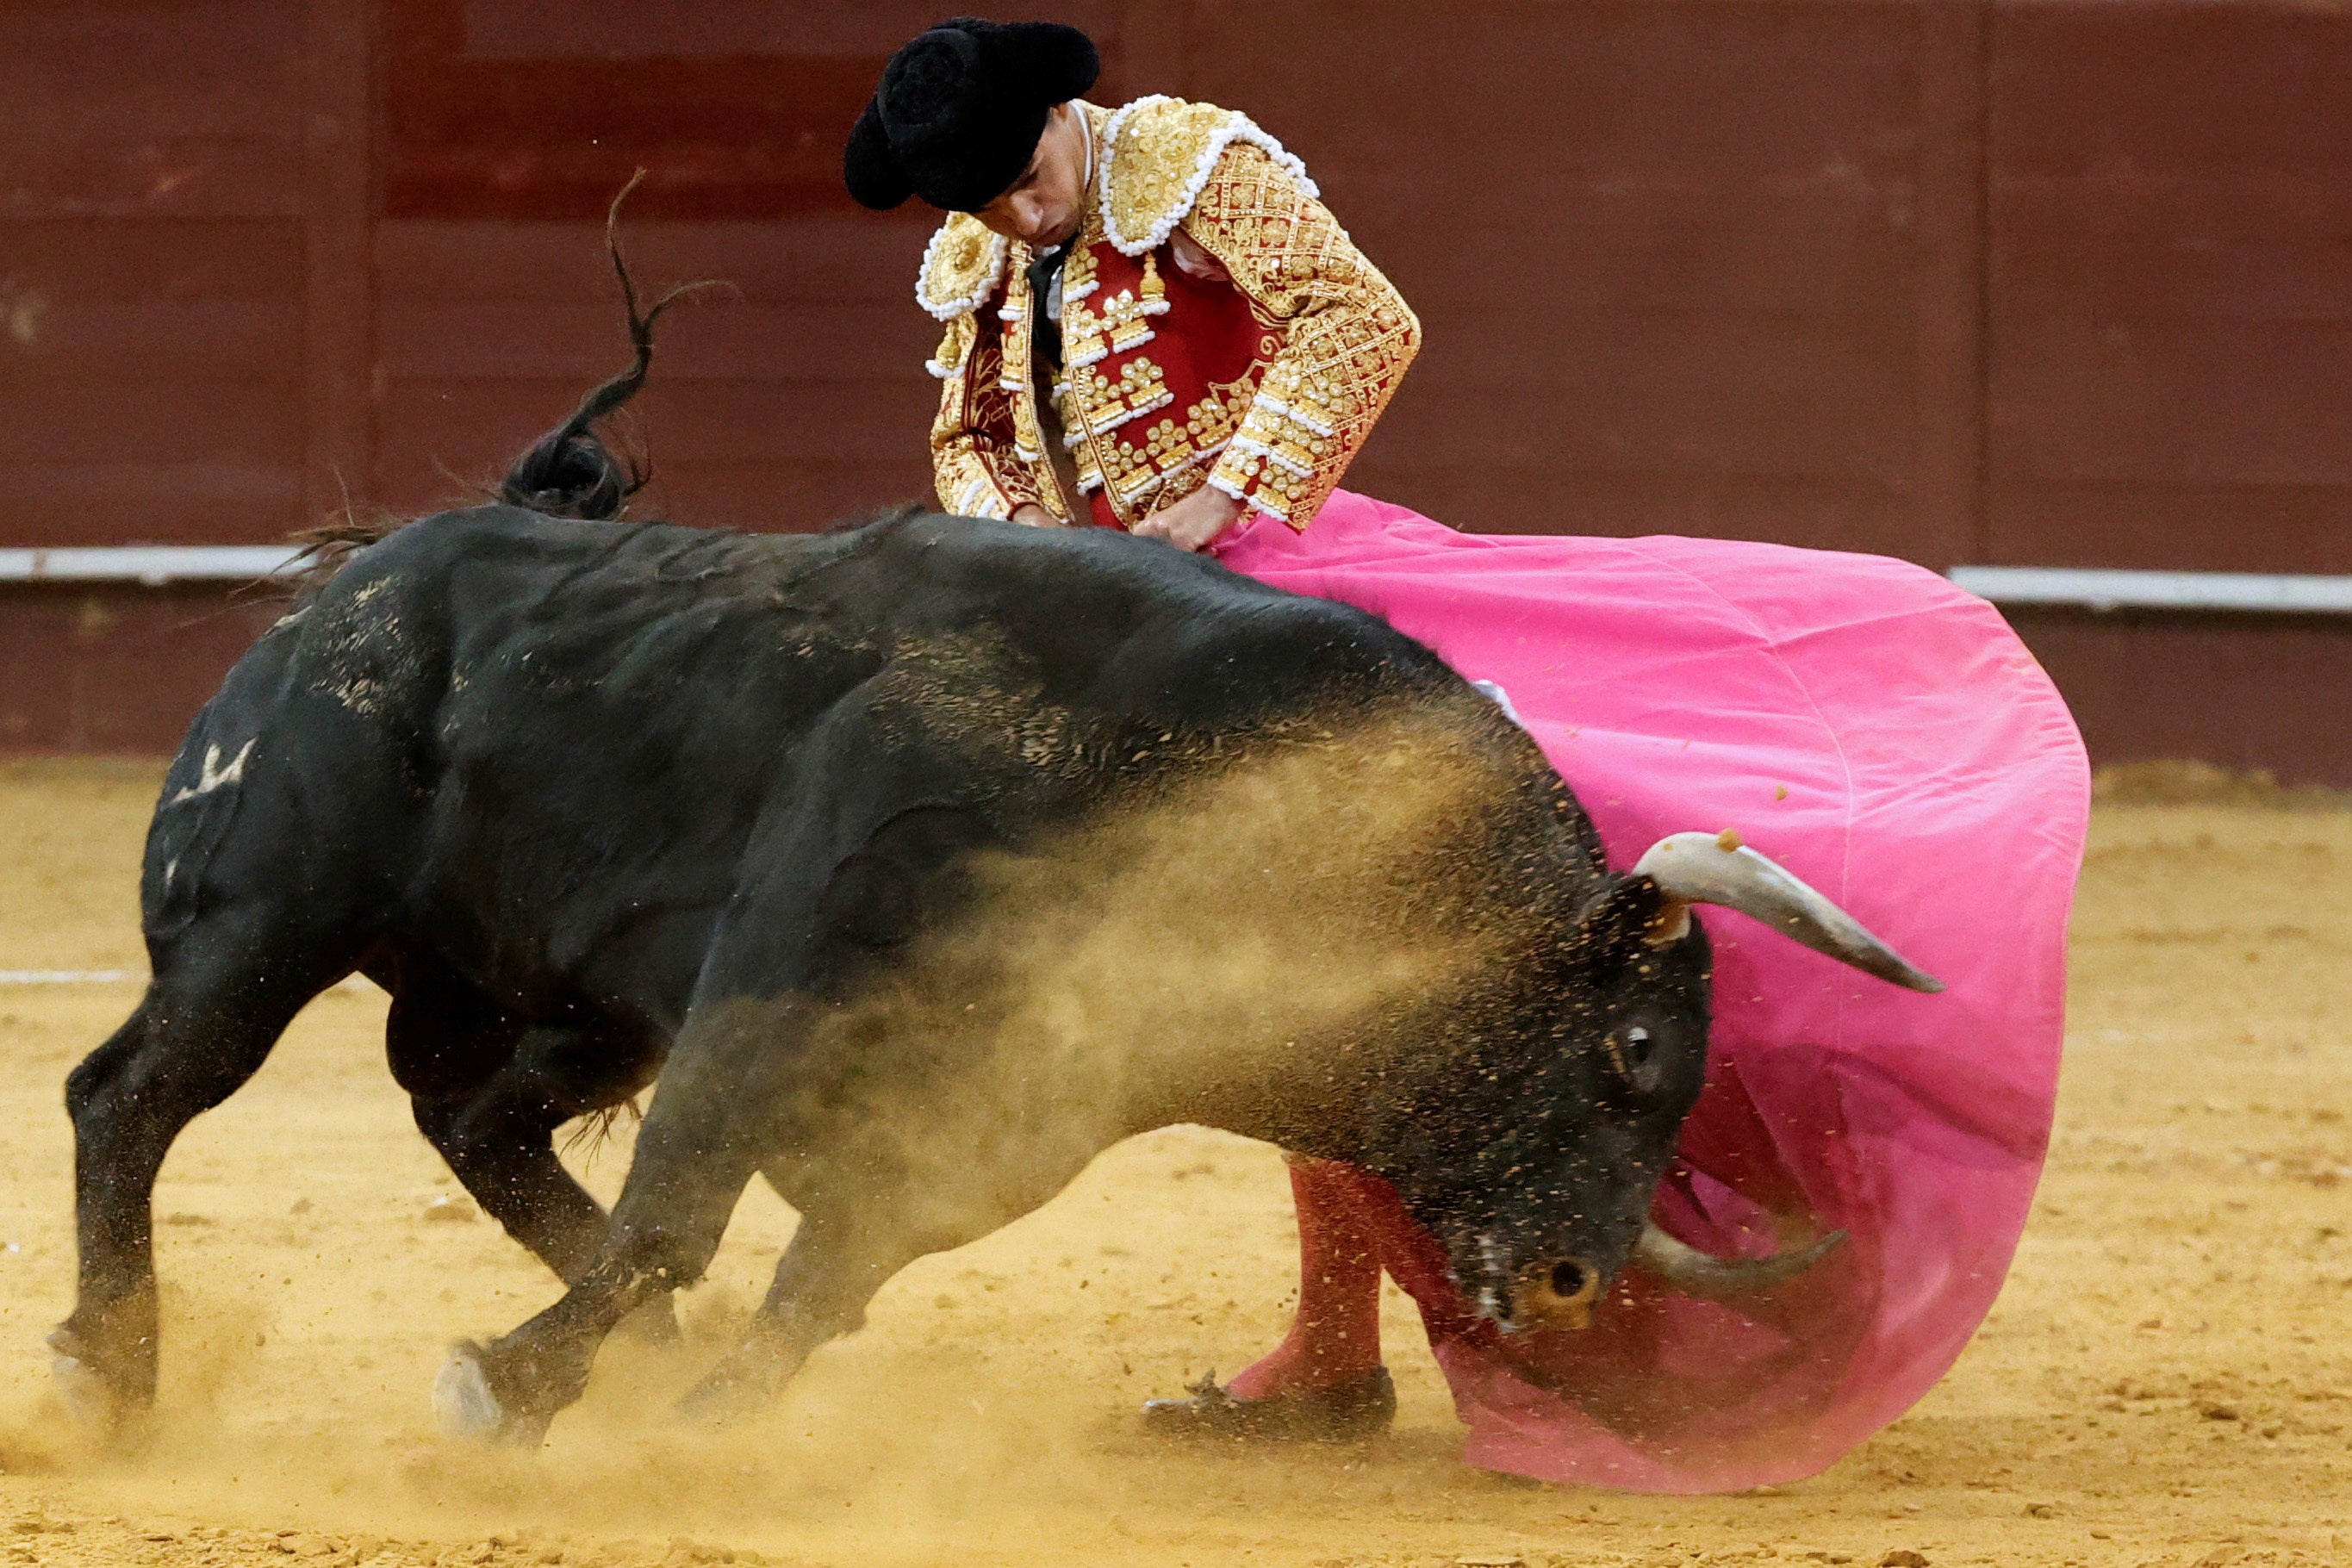 A Spanish bullfighter in action during at Vistalegre bullfighting arena, in Madrid